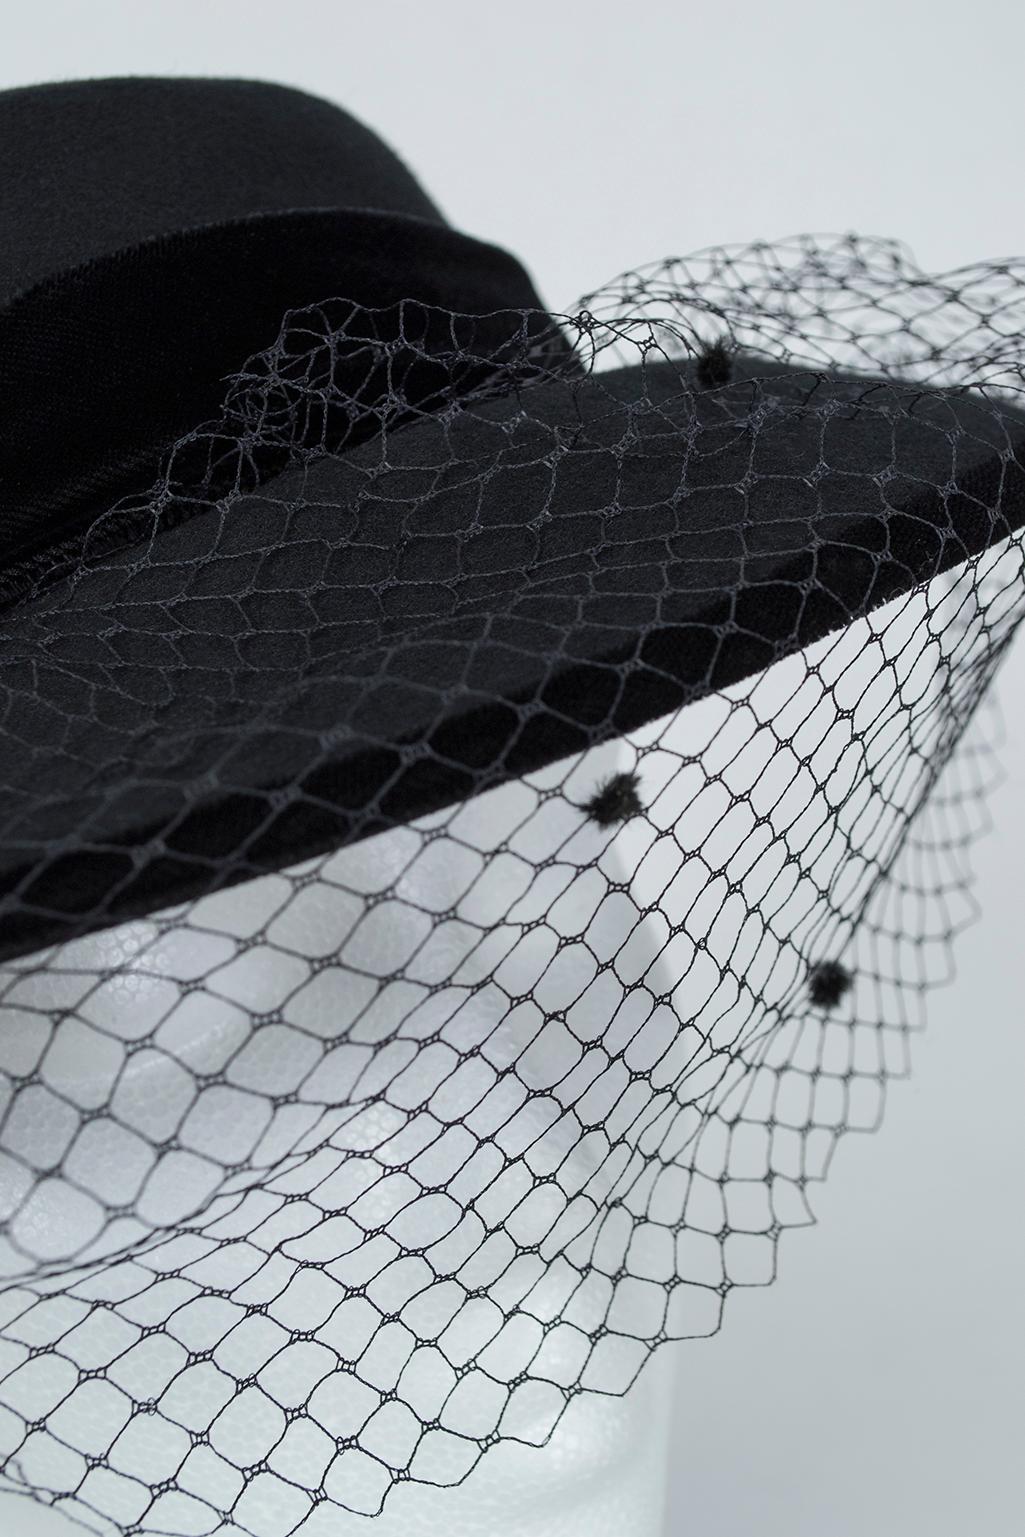 funeral hats with veils